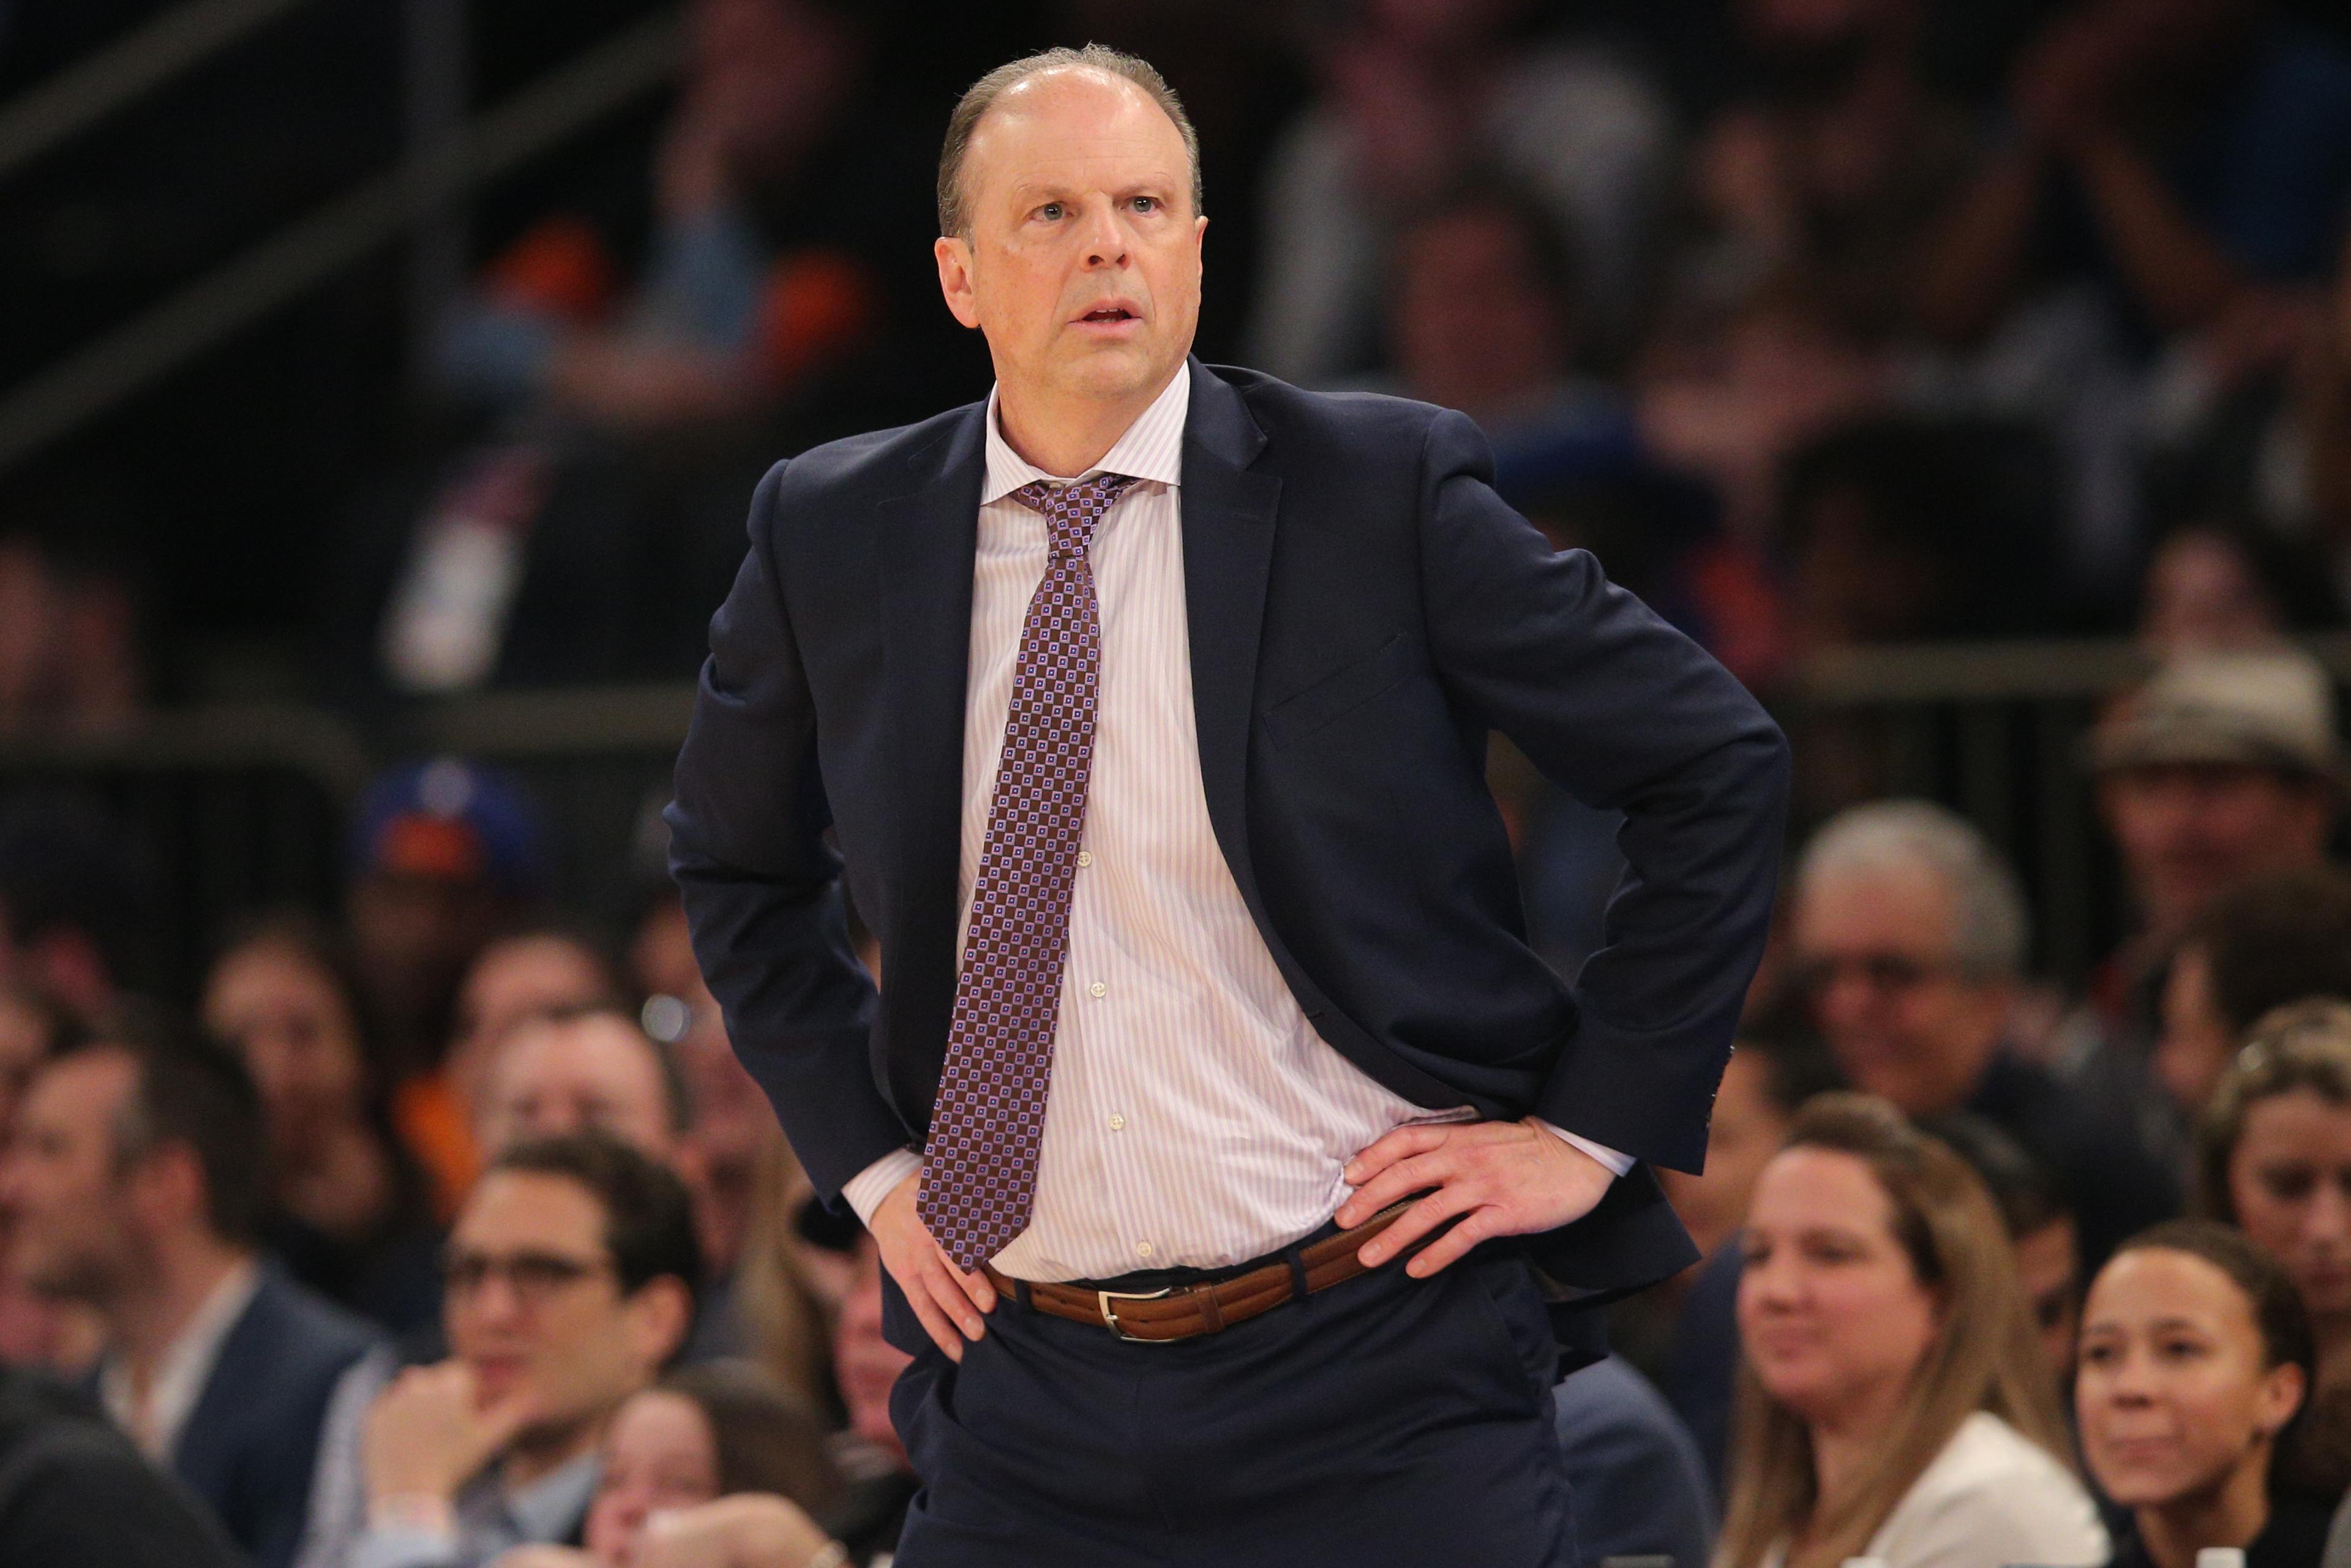 Feb 12, 2020; New York, New York, USA; New York Knicks interim head coach Mike Miller coaches against the Washington Wizards during the first quarter at Madison Square Garden. Mandatory Credit: Brad Penner-USA TODAY Sports / © Brad Penner-USA TODAY Sports